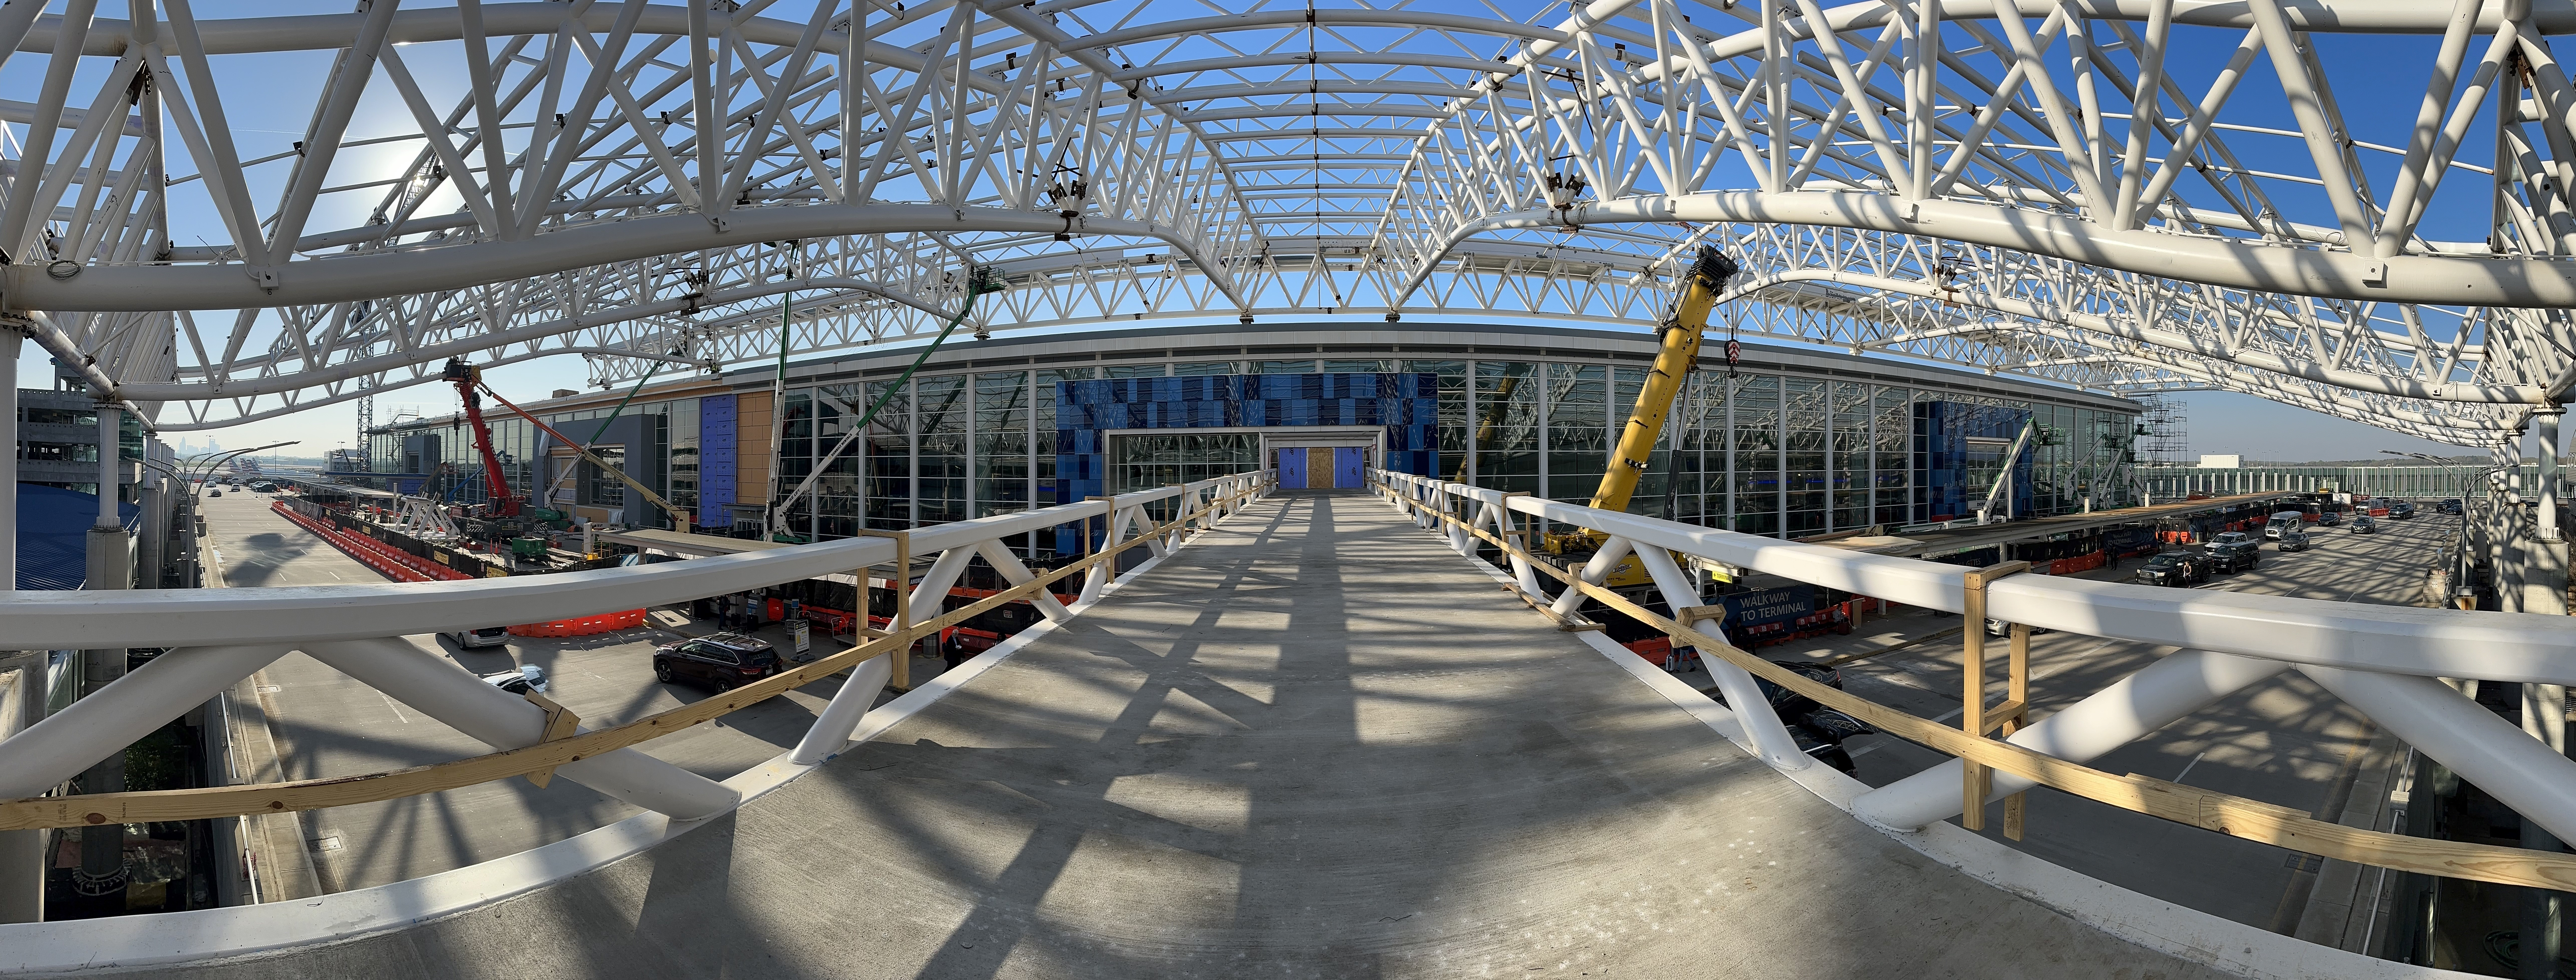 Upper level of canopy, clear blue skies and opening of white bars leading to doorway to the terminal 